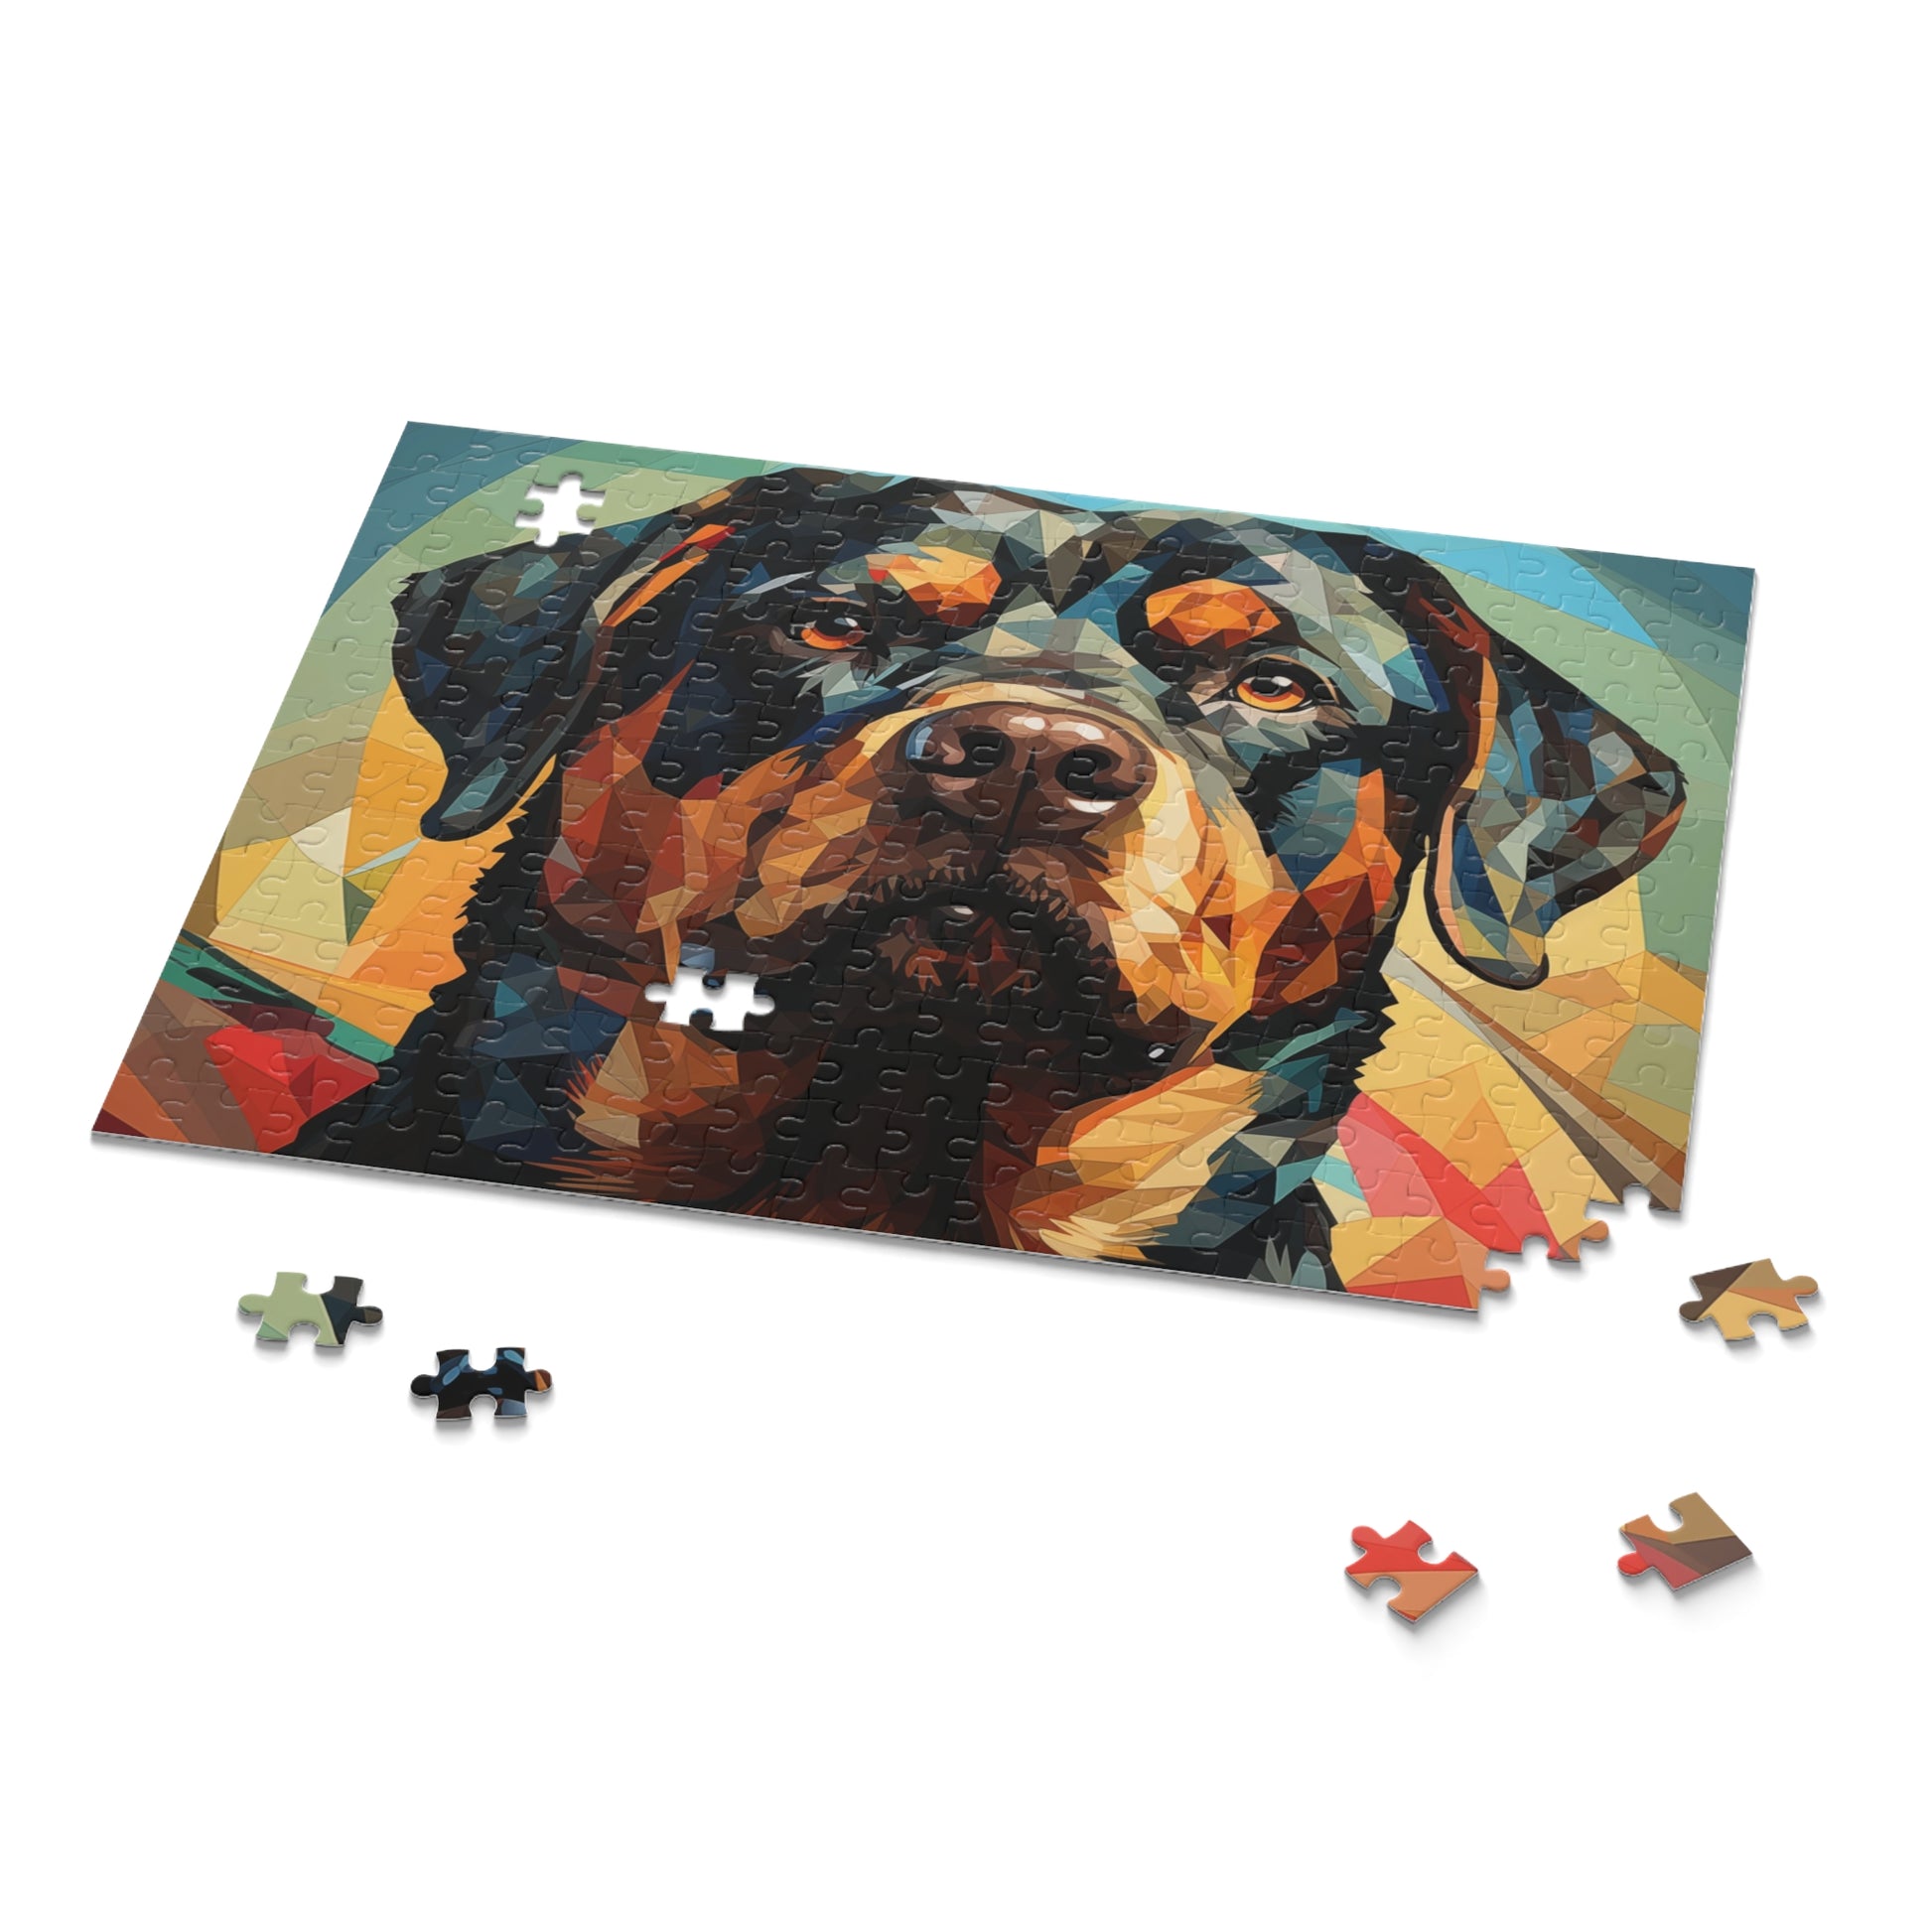 Rottweiler Dog Abstract Watercolor Jigsaw Puzzle Adult Birthday Business Jigsaw Puzzle Gift for Him Funny Humorous Indoor Outdoor Game Gift For Her Online-9